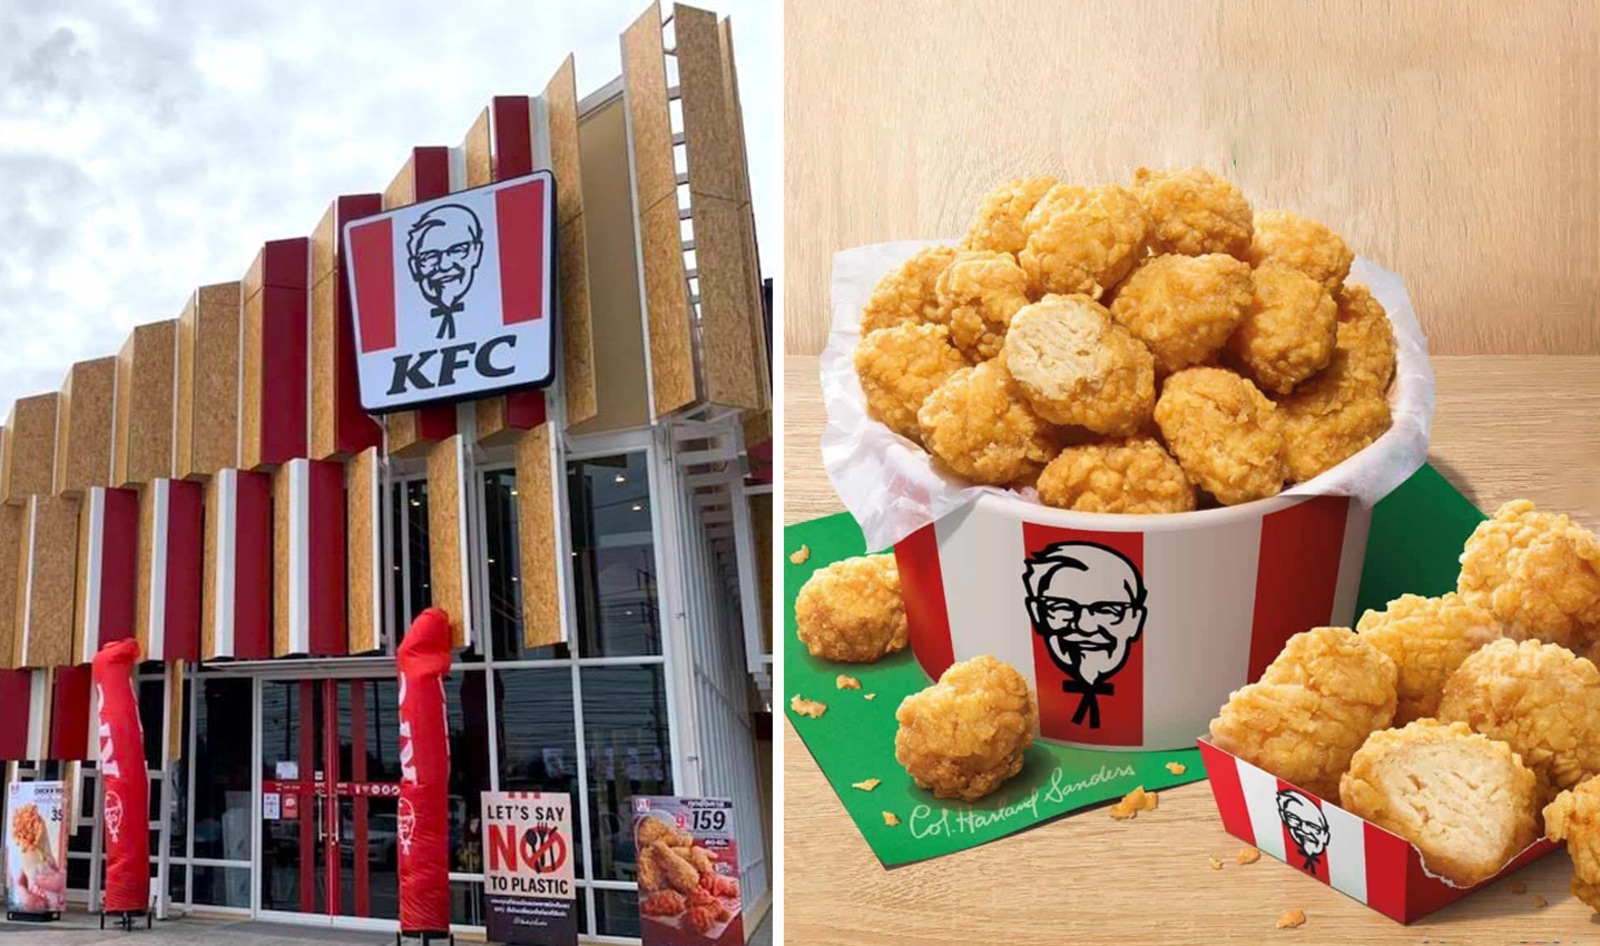 Vegan Popcorn Chicken Just Launched at KFC in Thailand